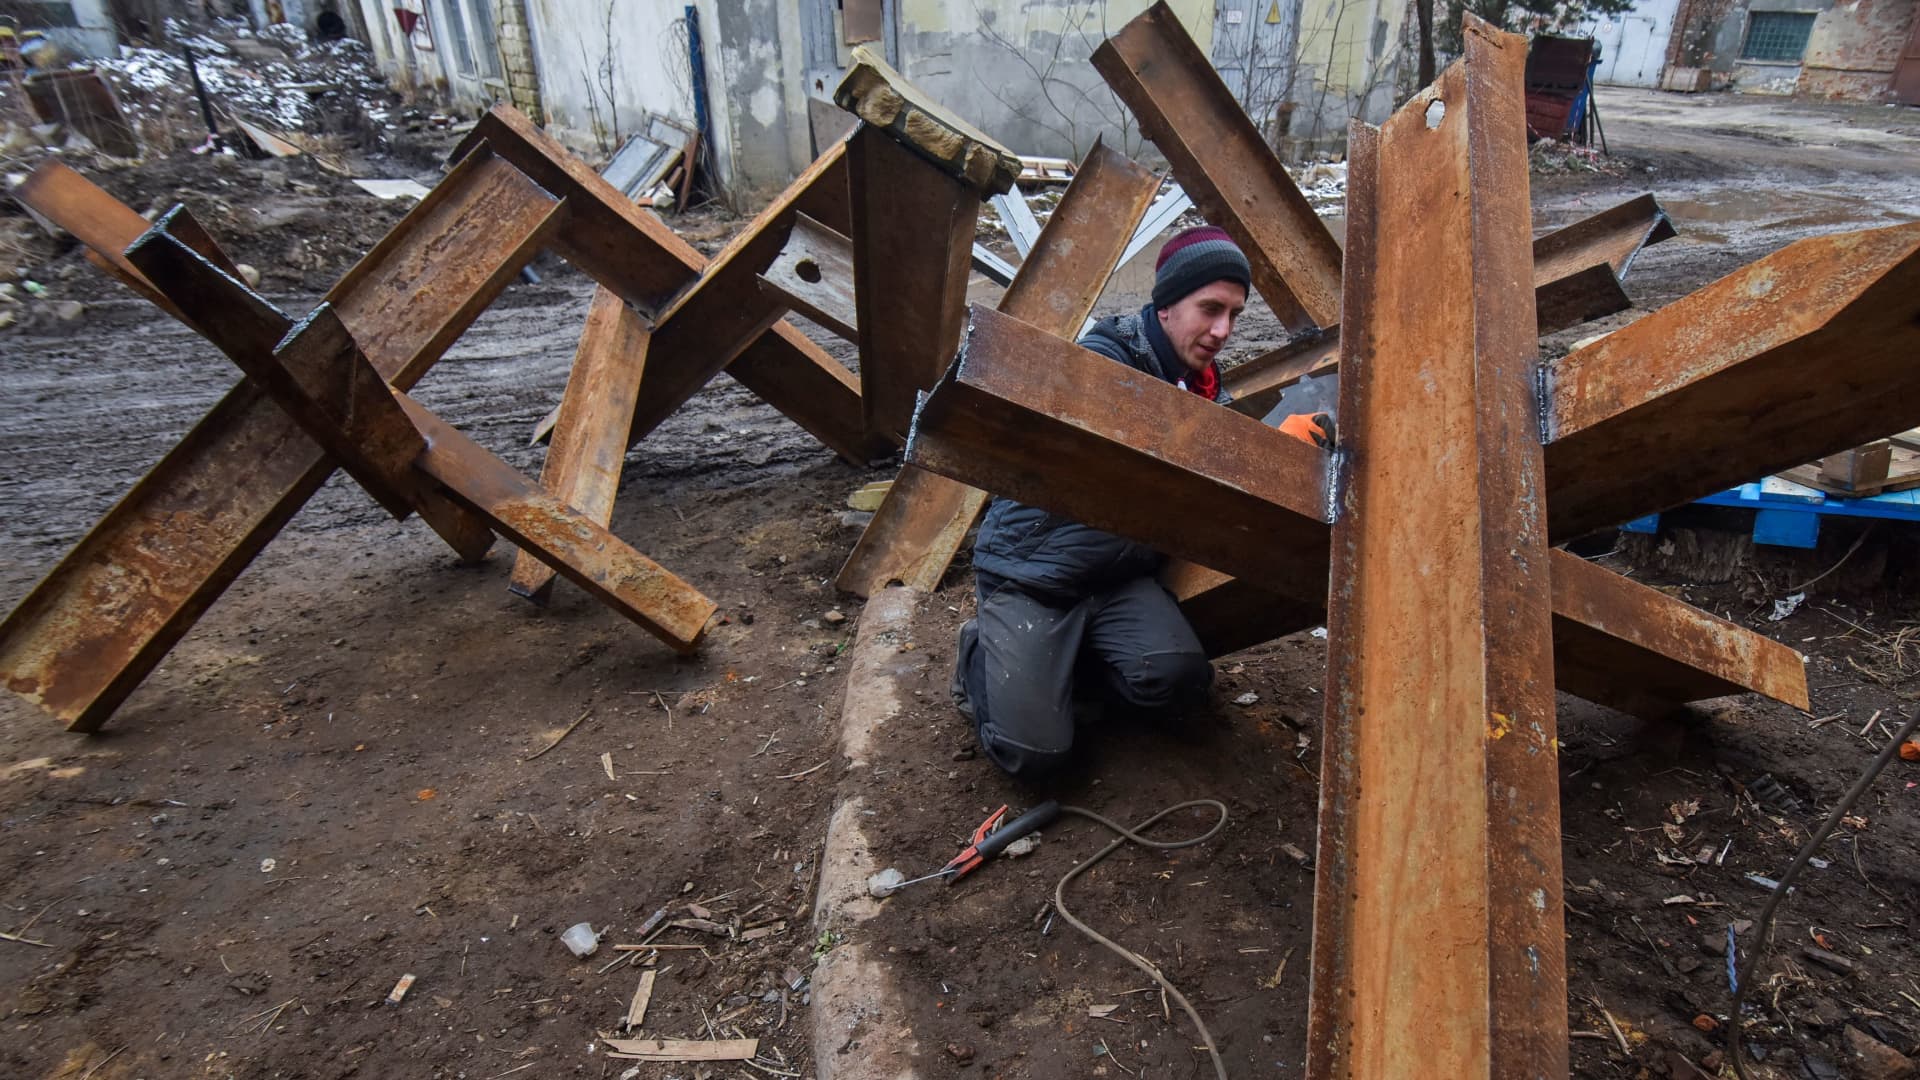 A local resident makes anti-tank obstacles to defend his and others cities, as Russia's invasion of Ukraine continues, in Lviv, Ukraine March 2, 2022. 